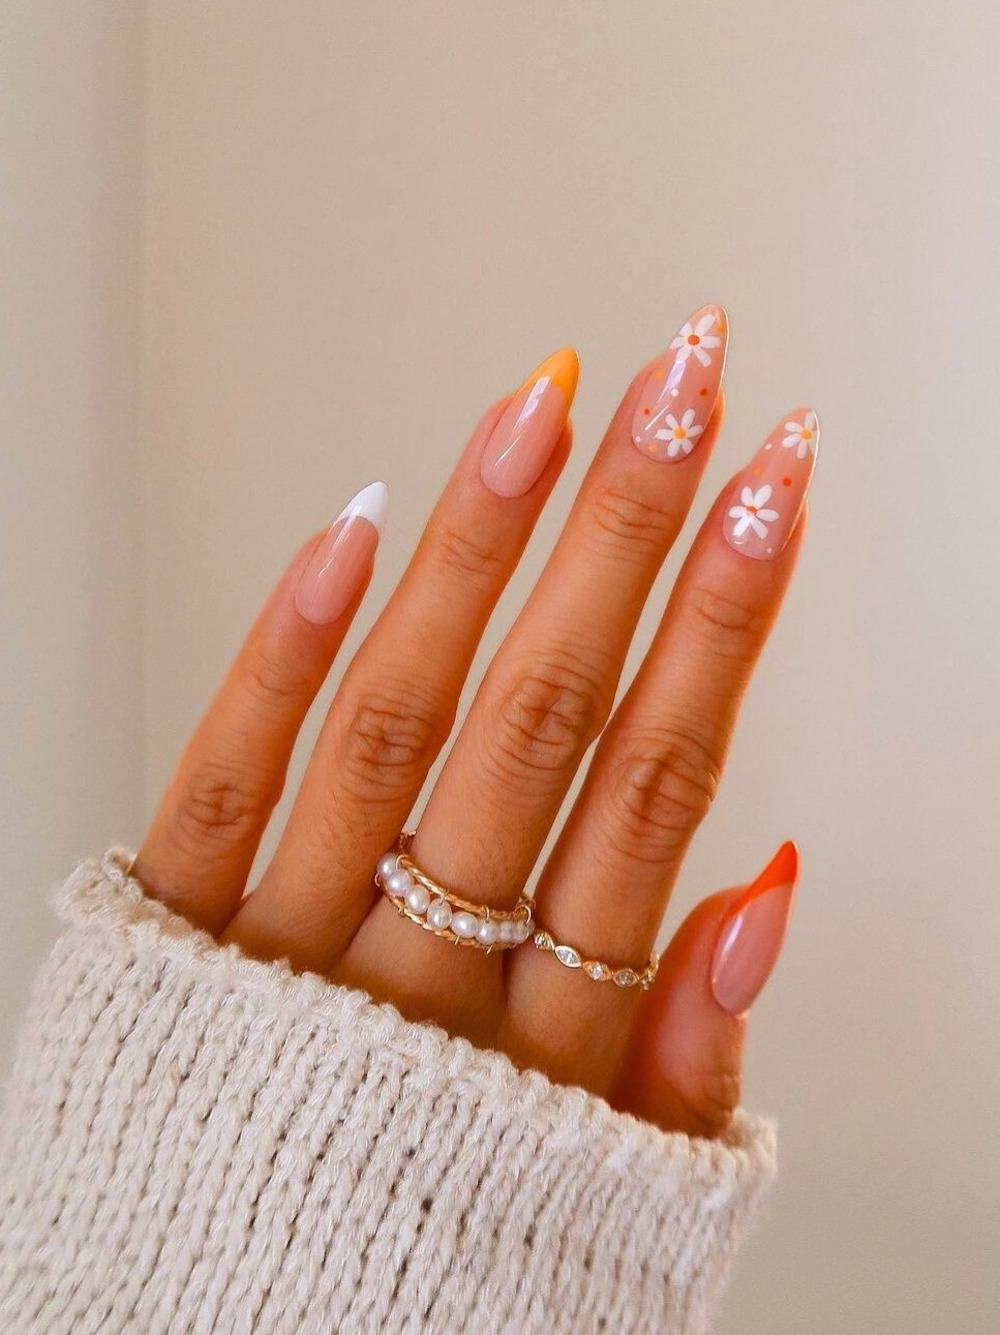 A hand with long nude almond nails featuring white, yellow, and orange French tips and accent nails with white floral art